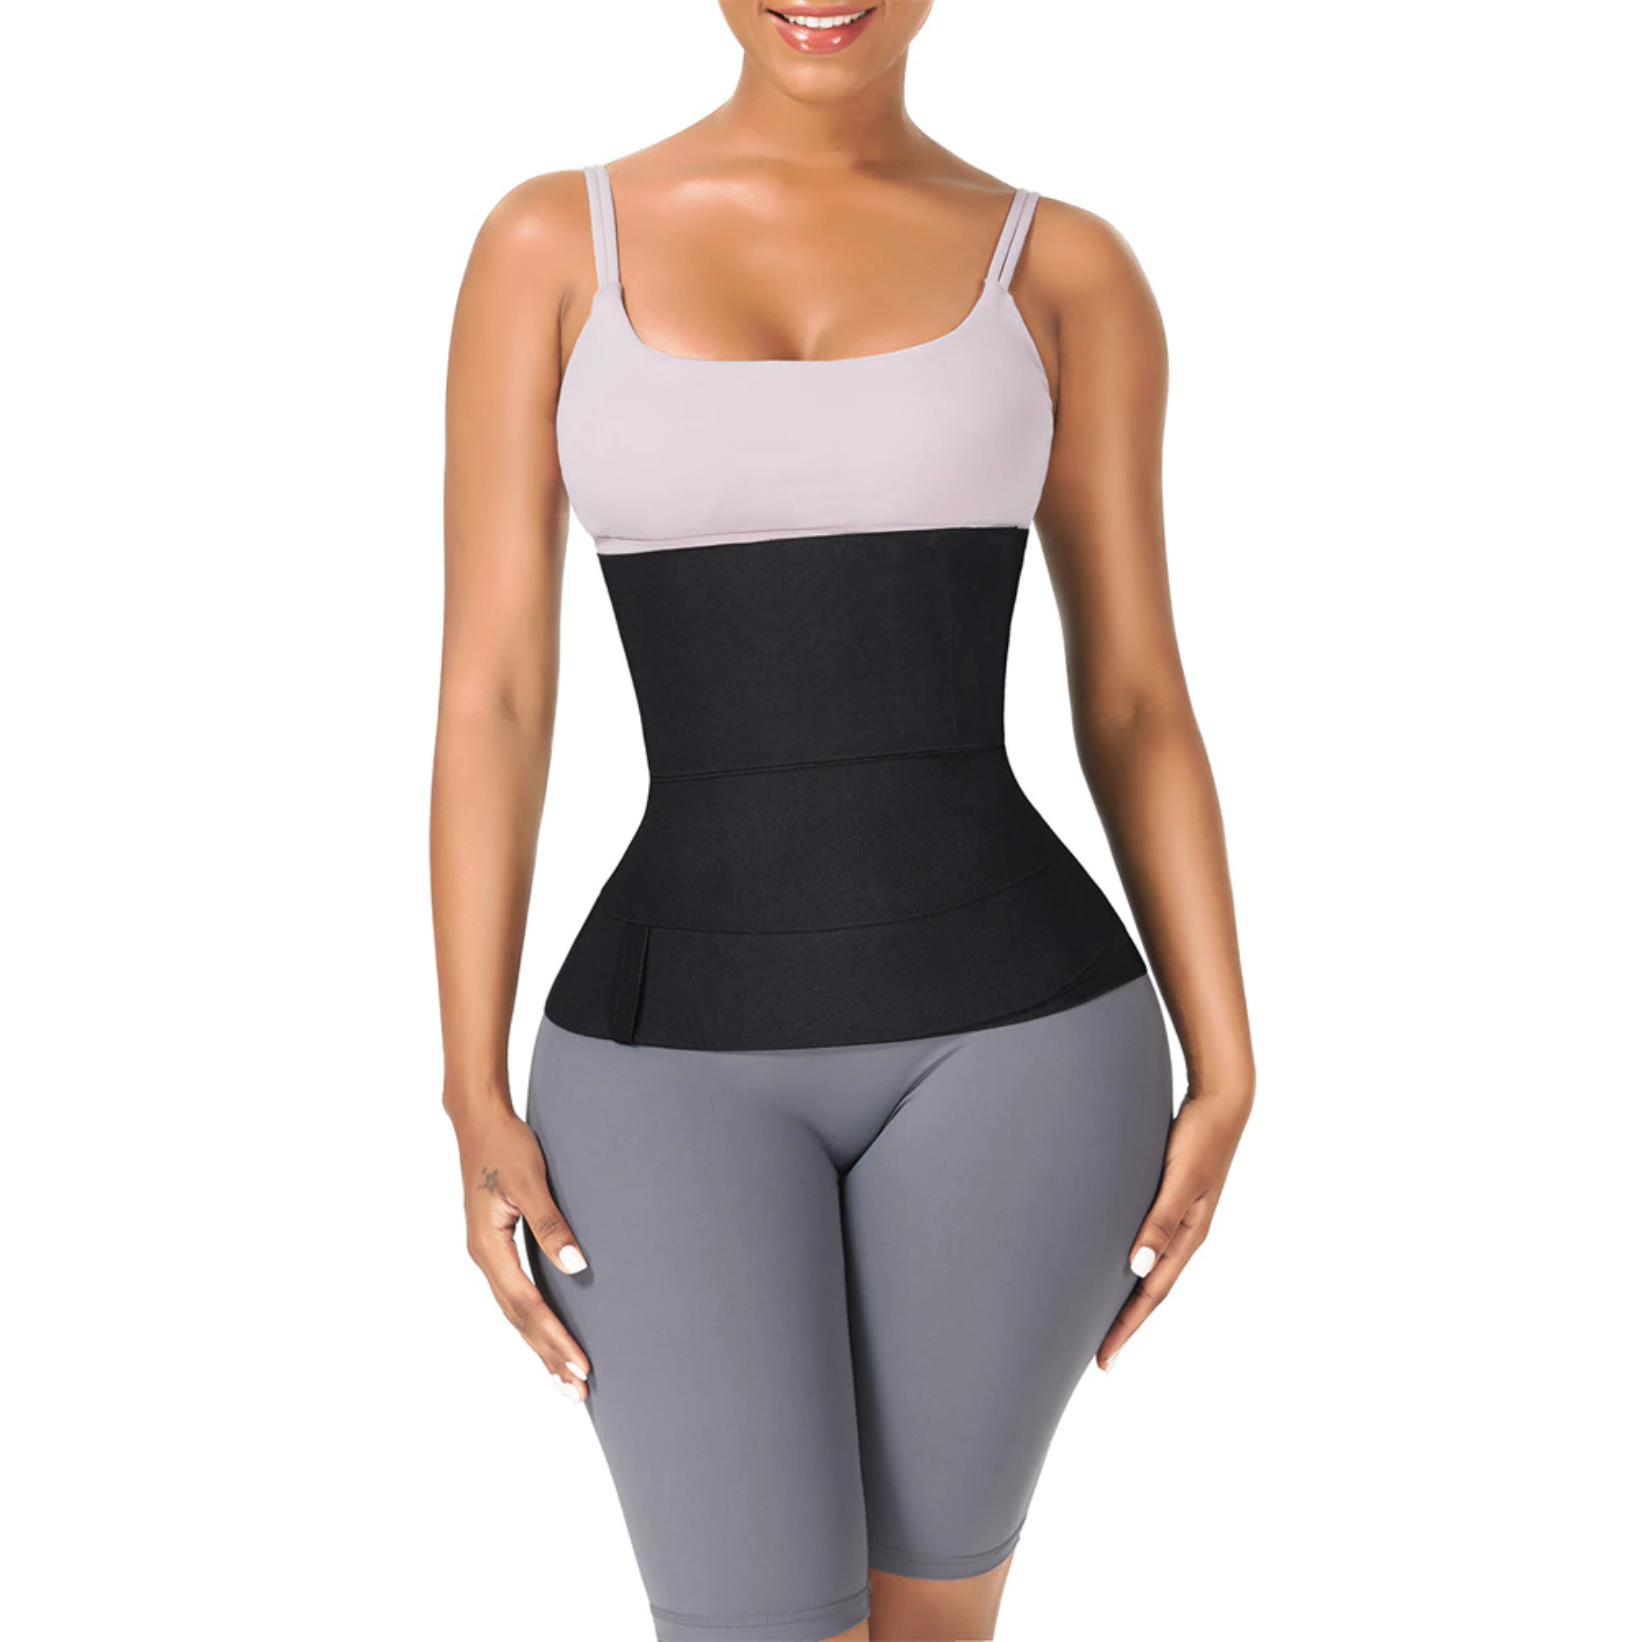 Waist Trainer for Women Under Clothes - Magic Waist Wraps for Stomach sweat  belt - Me Up Bandage